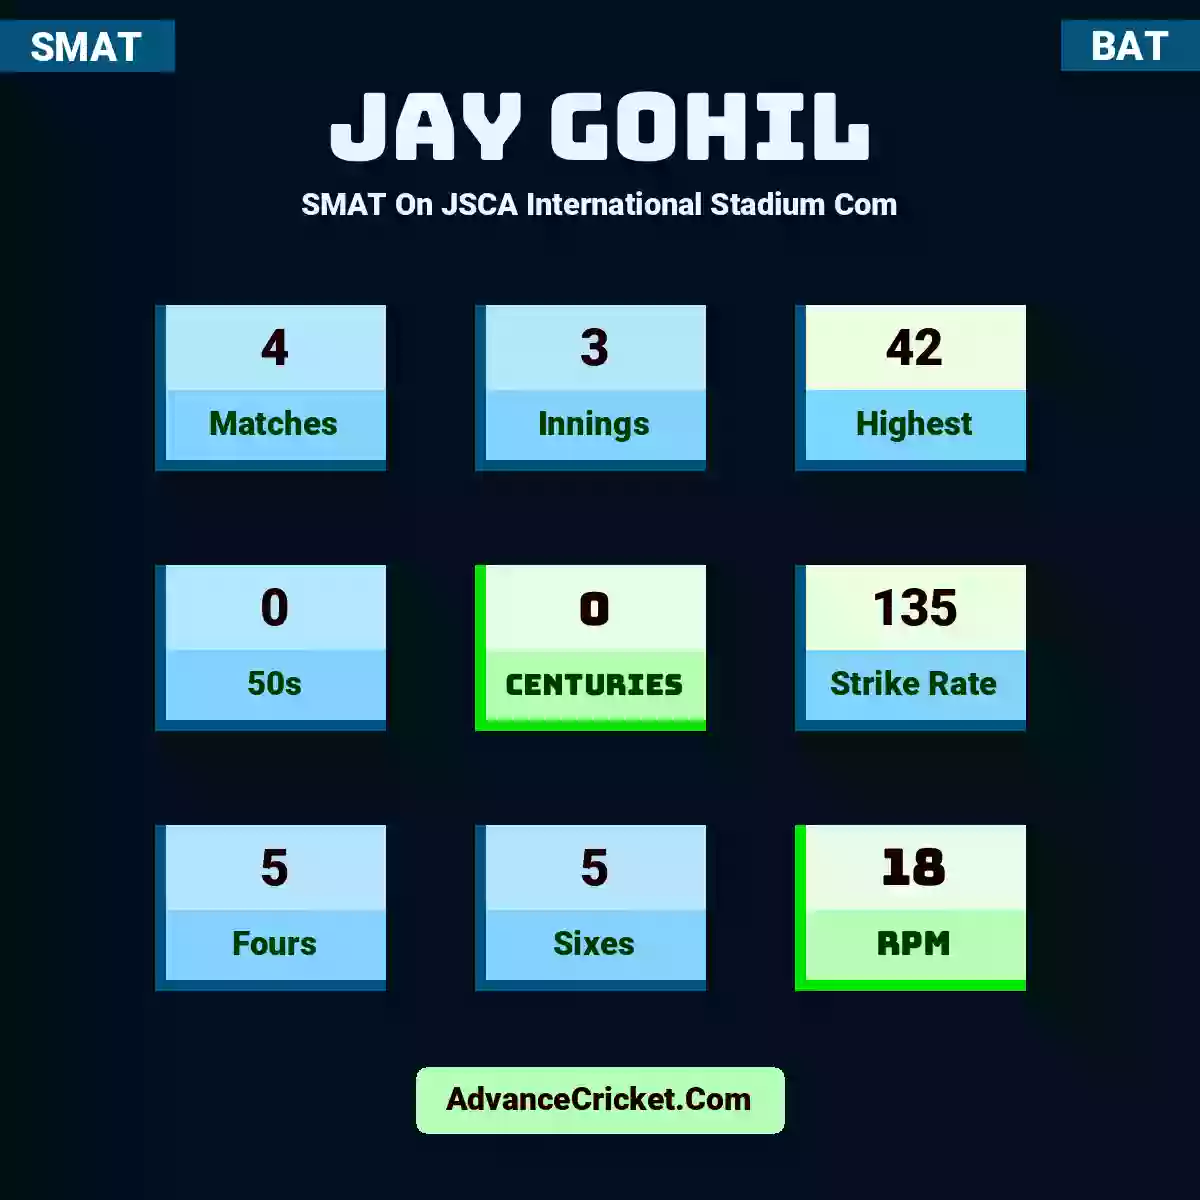 Jay Gohil SMAT  On JSCA International Stadium Com, Jay Gohil played 4 matches, scored 42 runs as highest, 0 half-centuries, and 0 centuries, with a strike rate of 135. J.Gohil hit 5 fours and 5 sixes, with an RPM of 18.